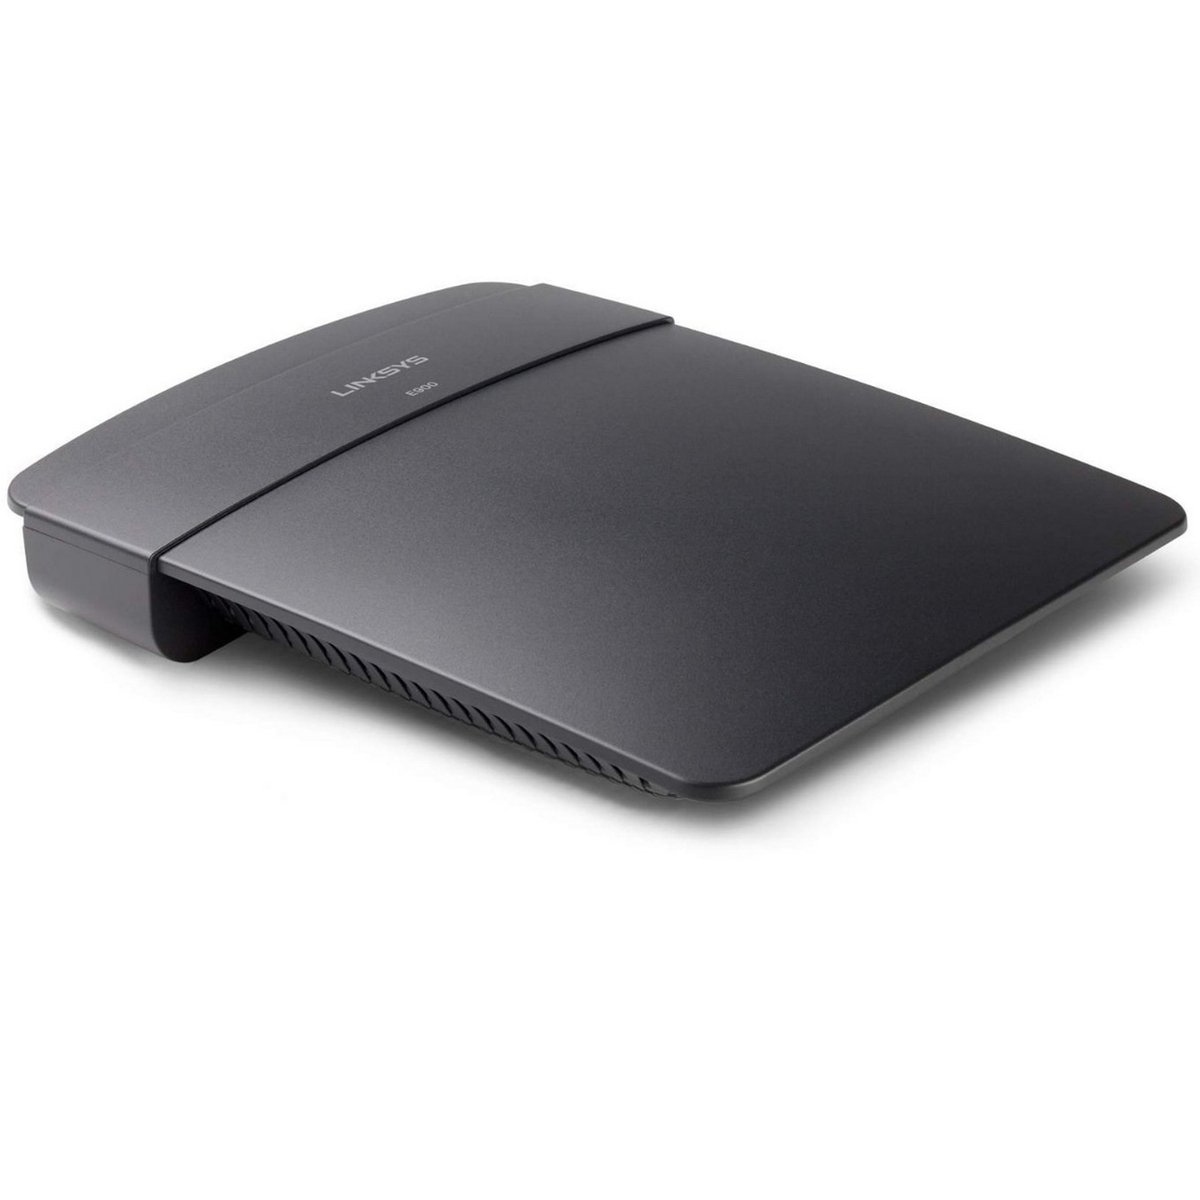 Linksys Wireless N300 Router E900-ME